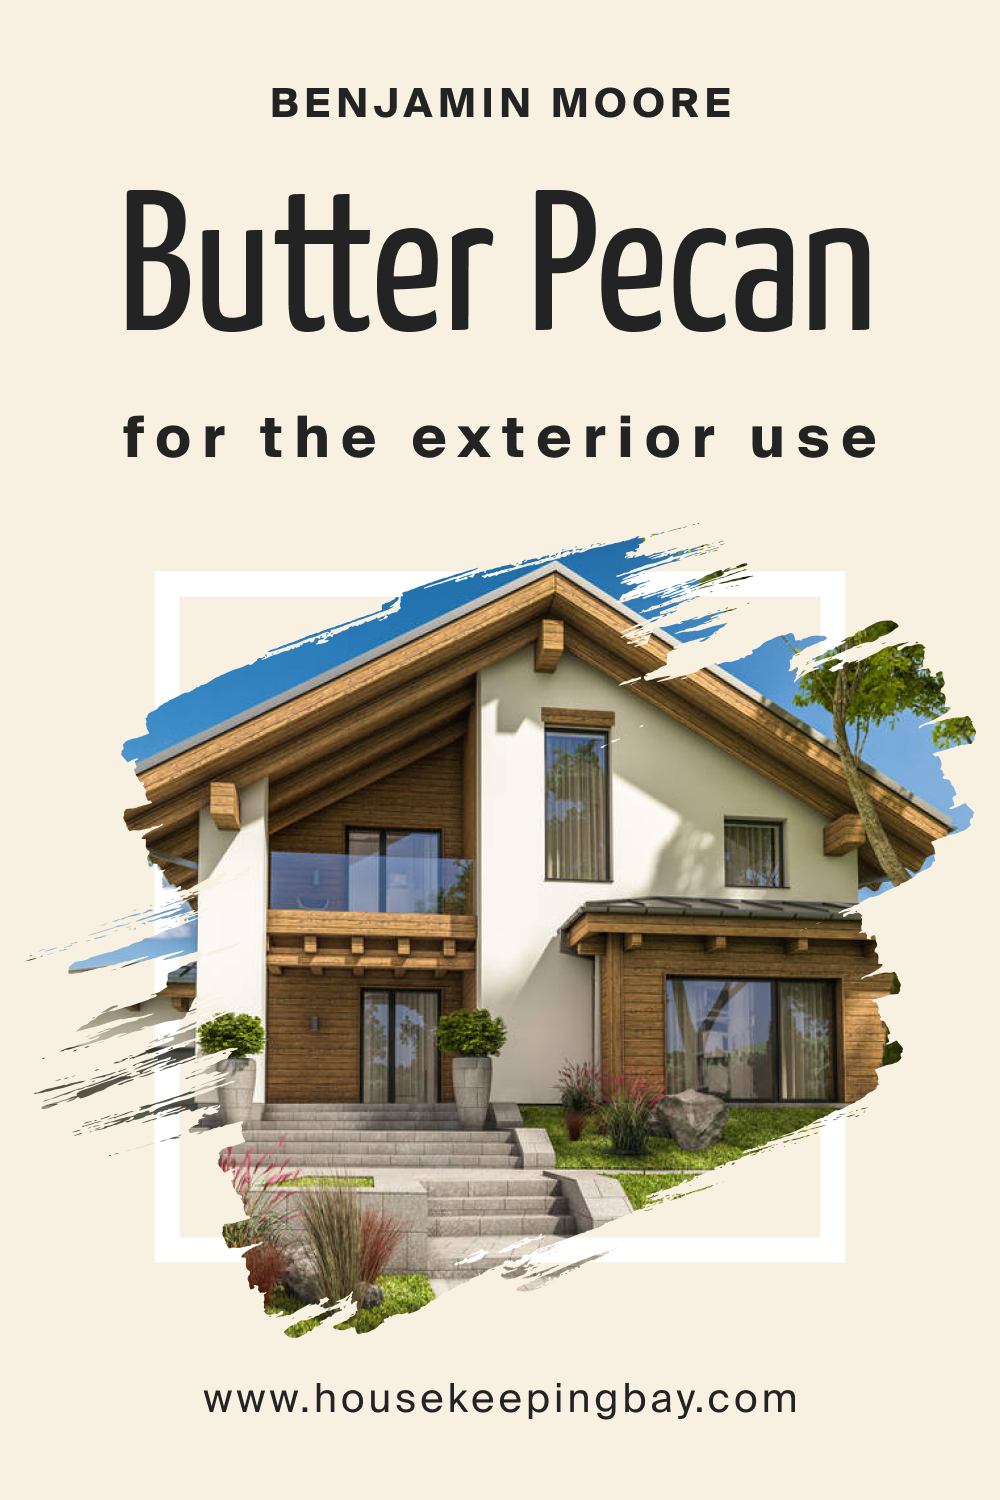 Benjamin Moore. Butter Pecan OC 89 for the Exterior Use